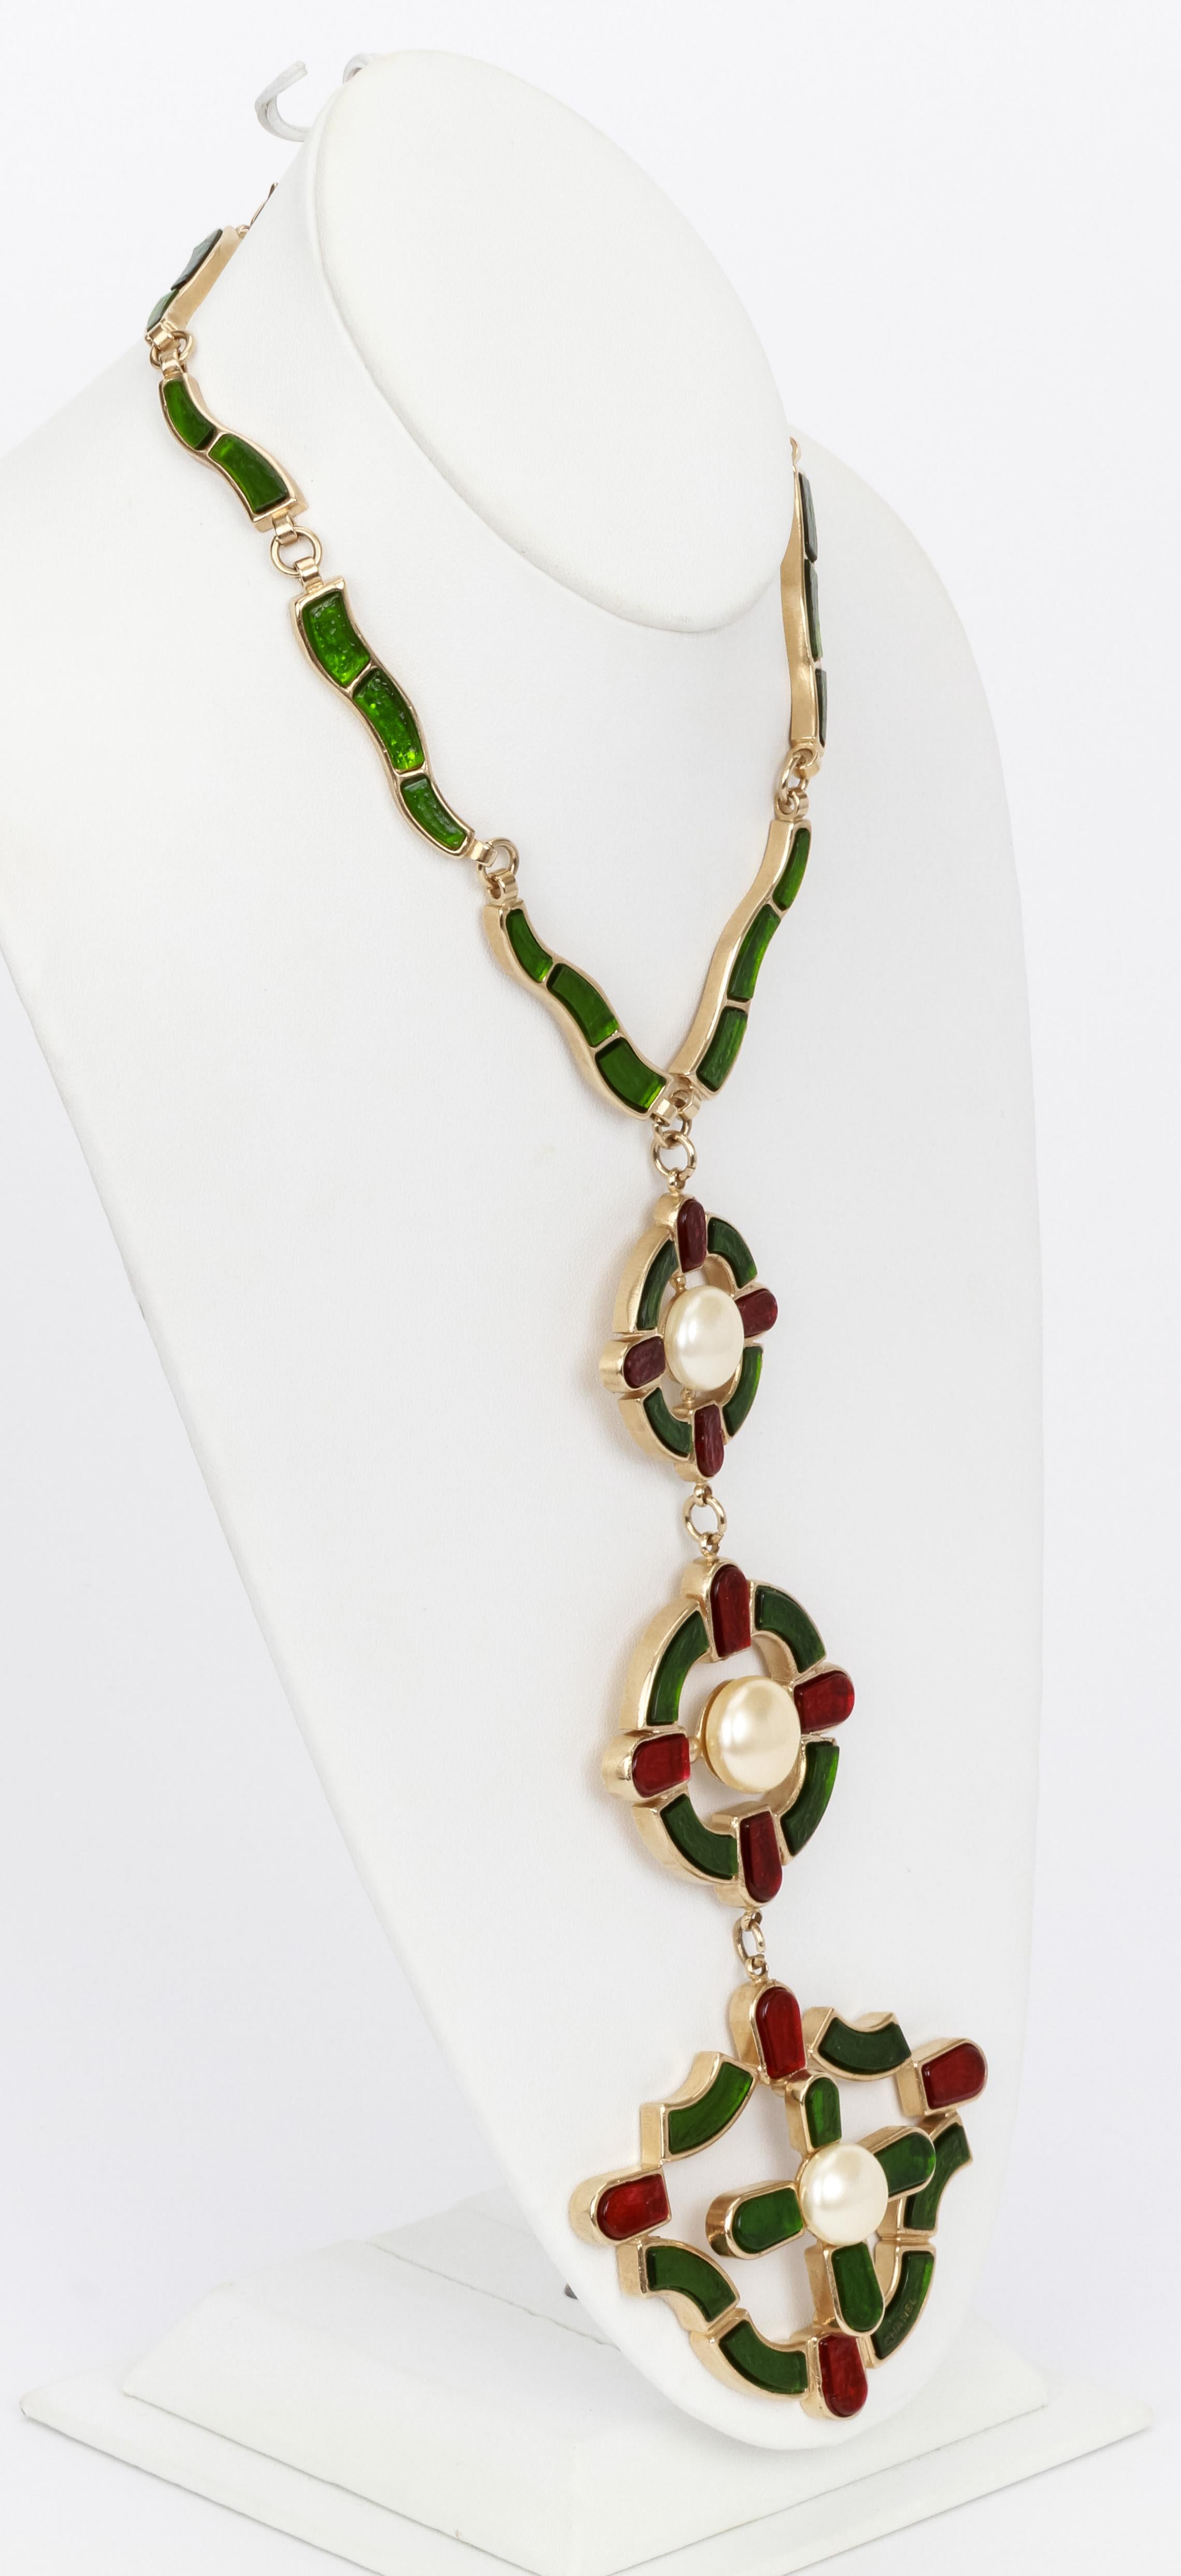 Important Chanel necklace with triple pendant, green and dark red gripoix, each pendant designed around a bombe' pearl. adjustable length, original pouch and box, collar 10